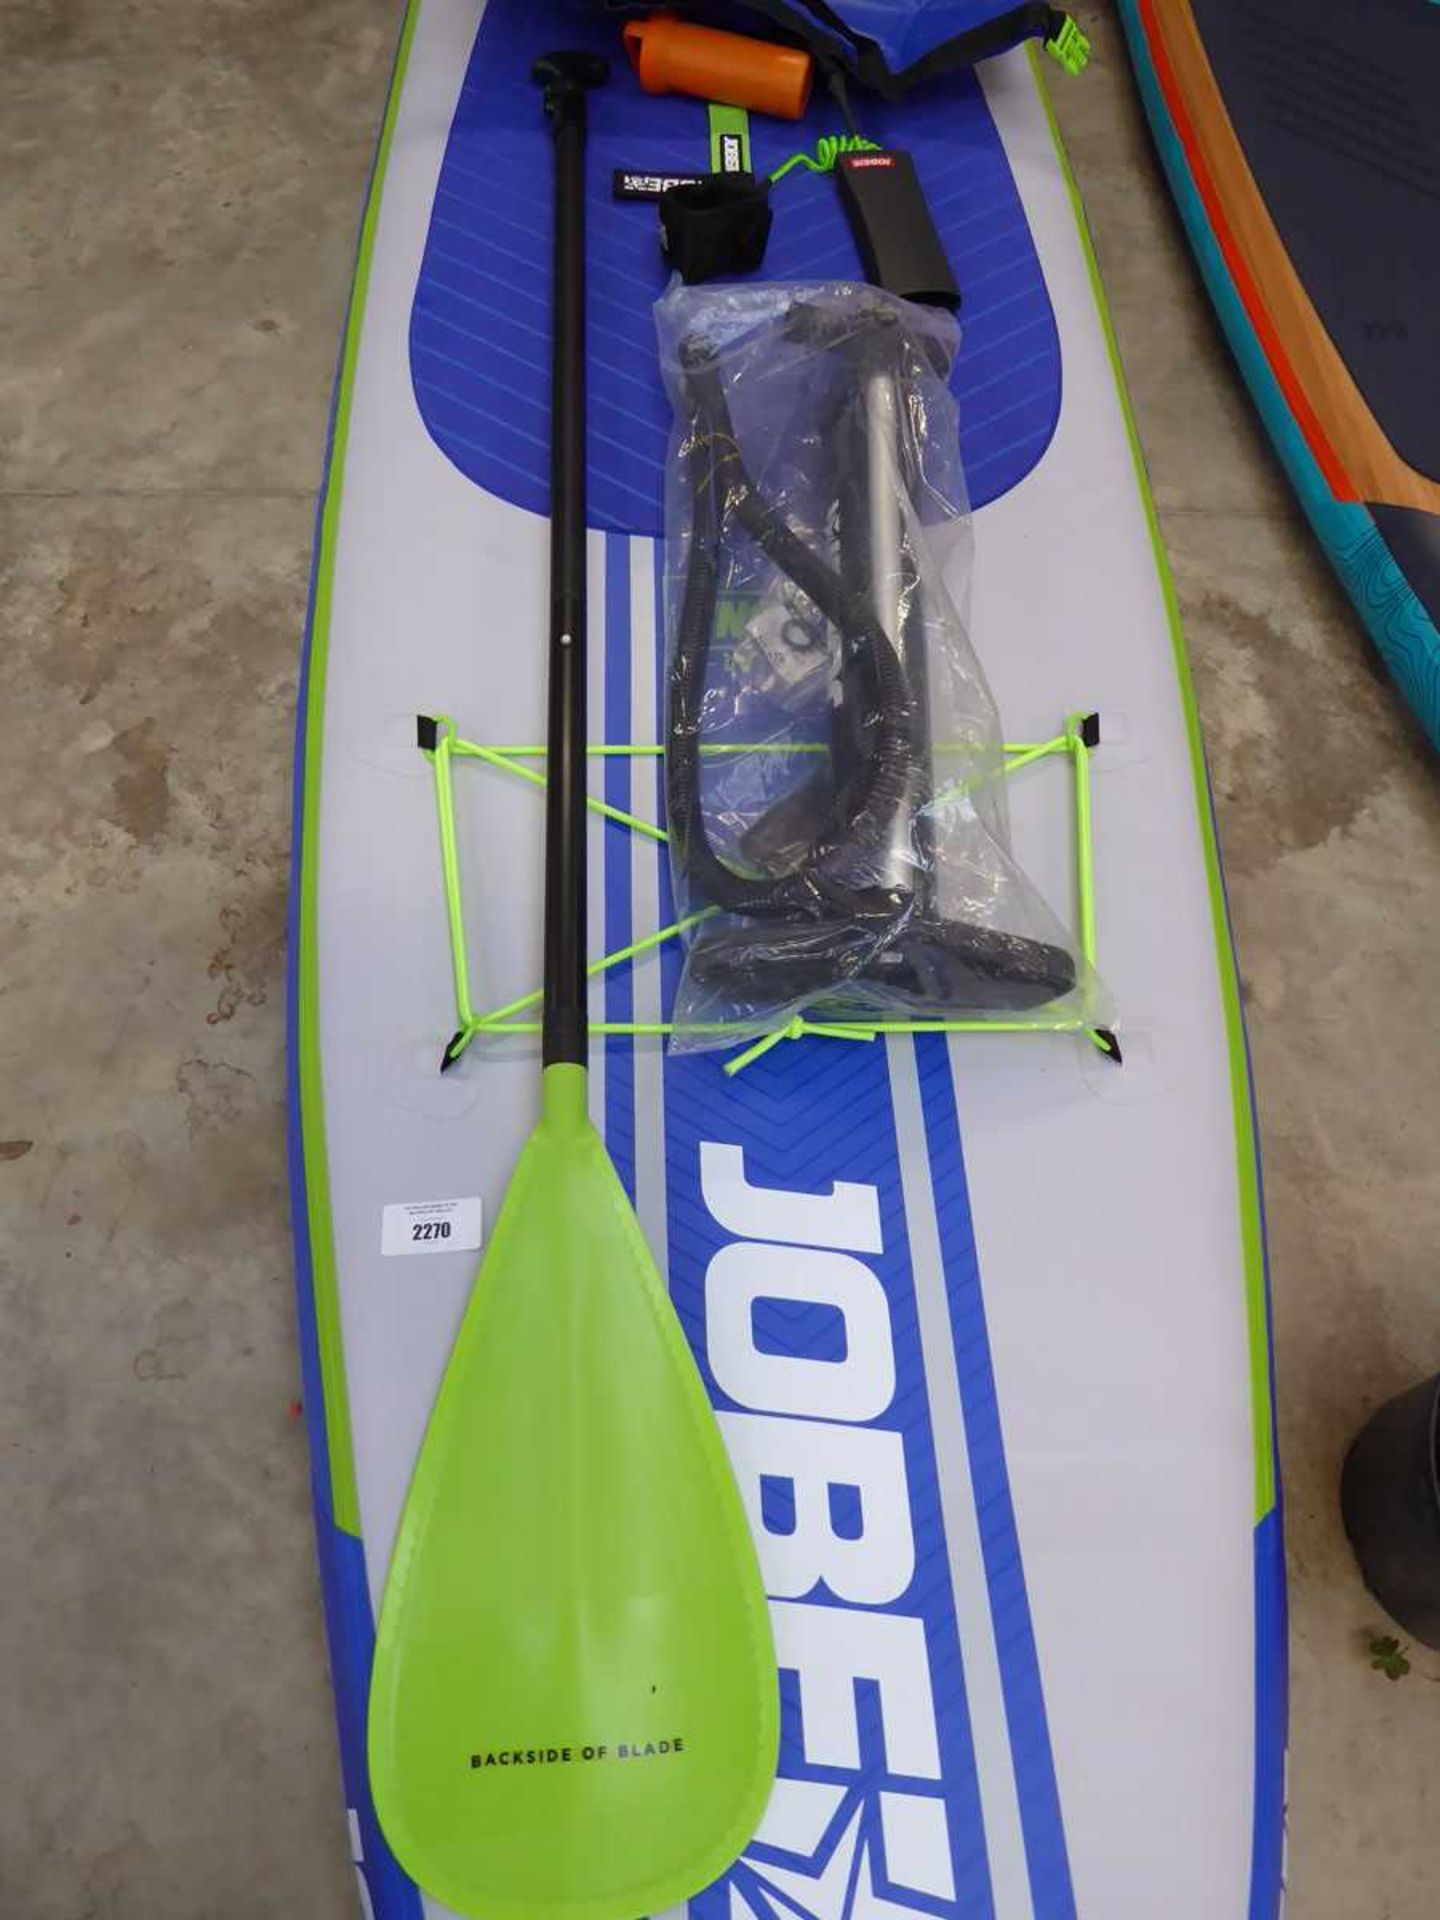 +VAT Jobe Aero inflatable stand up paddle board with bag, pump and oar in box - Bild 2 aus 4